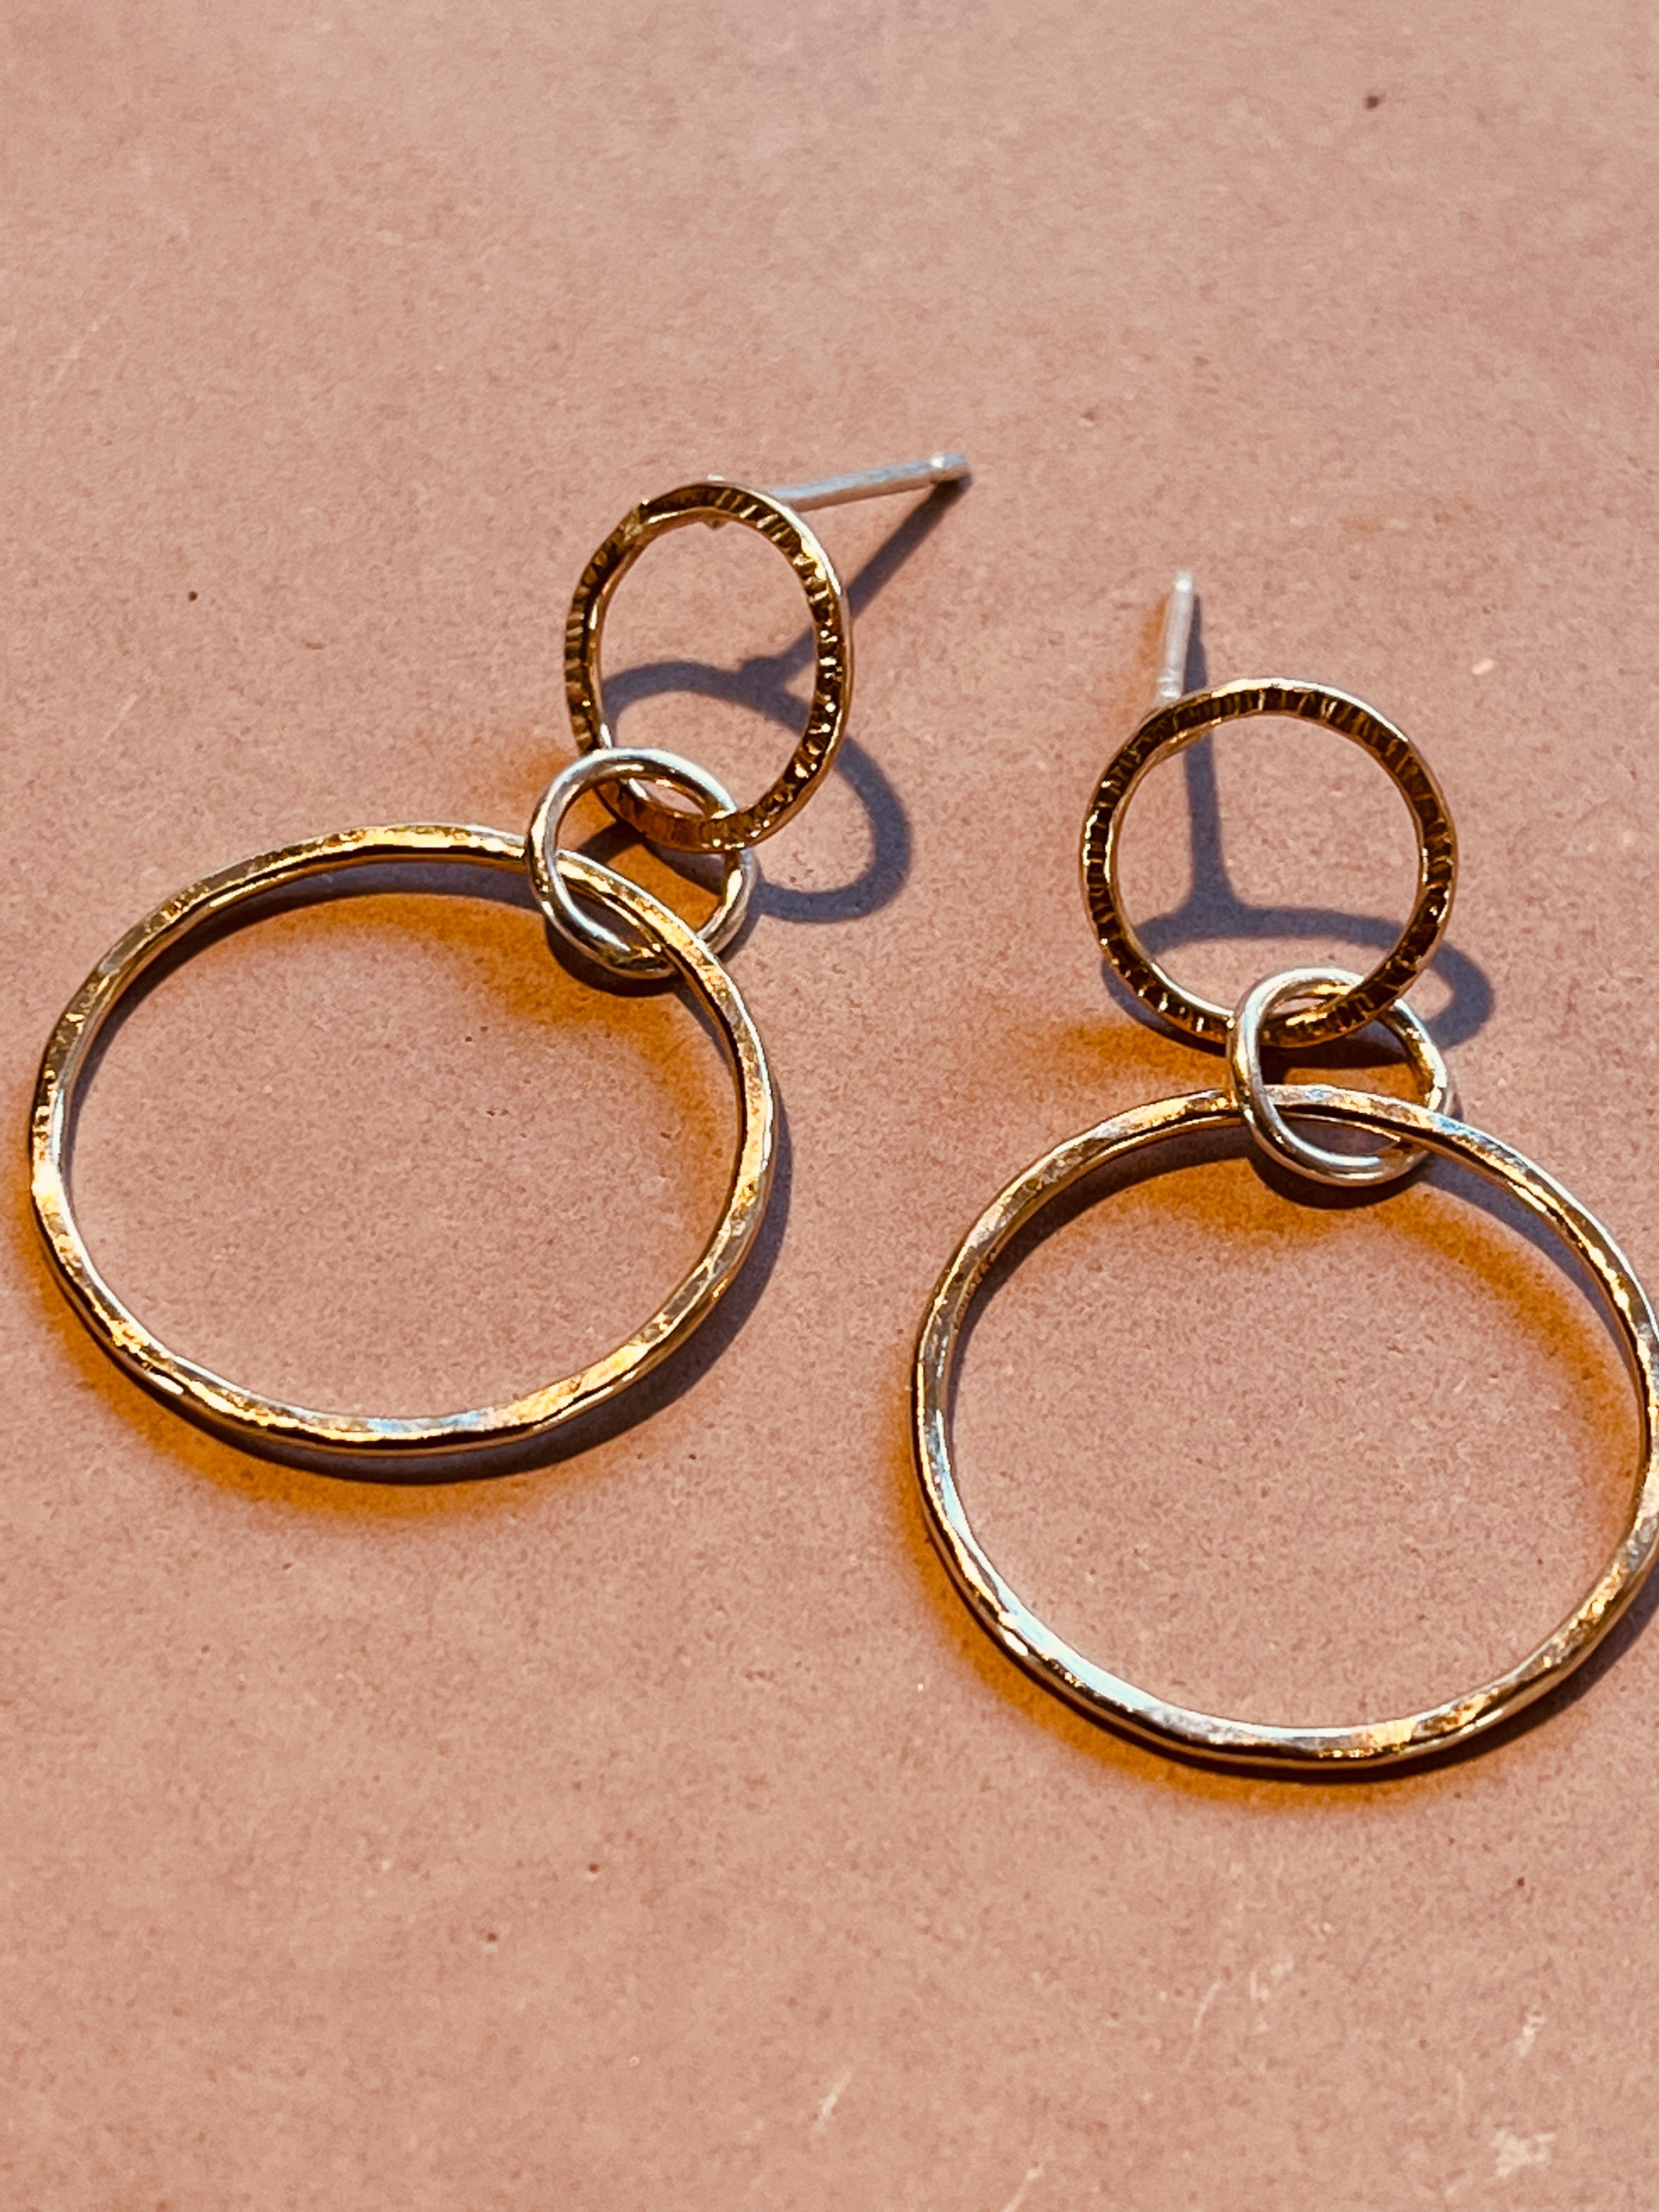 Gold linked ring earings.